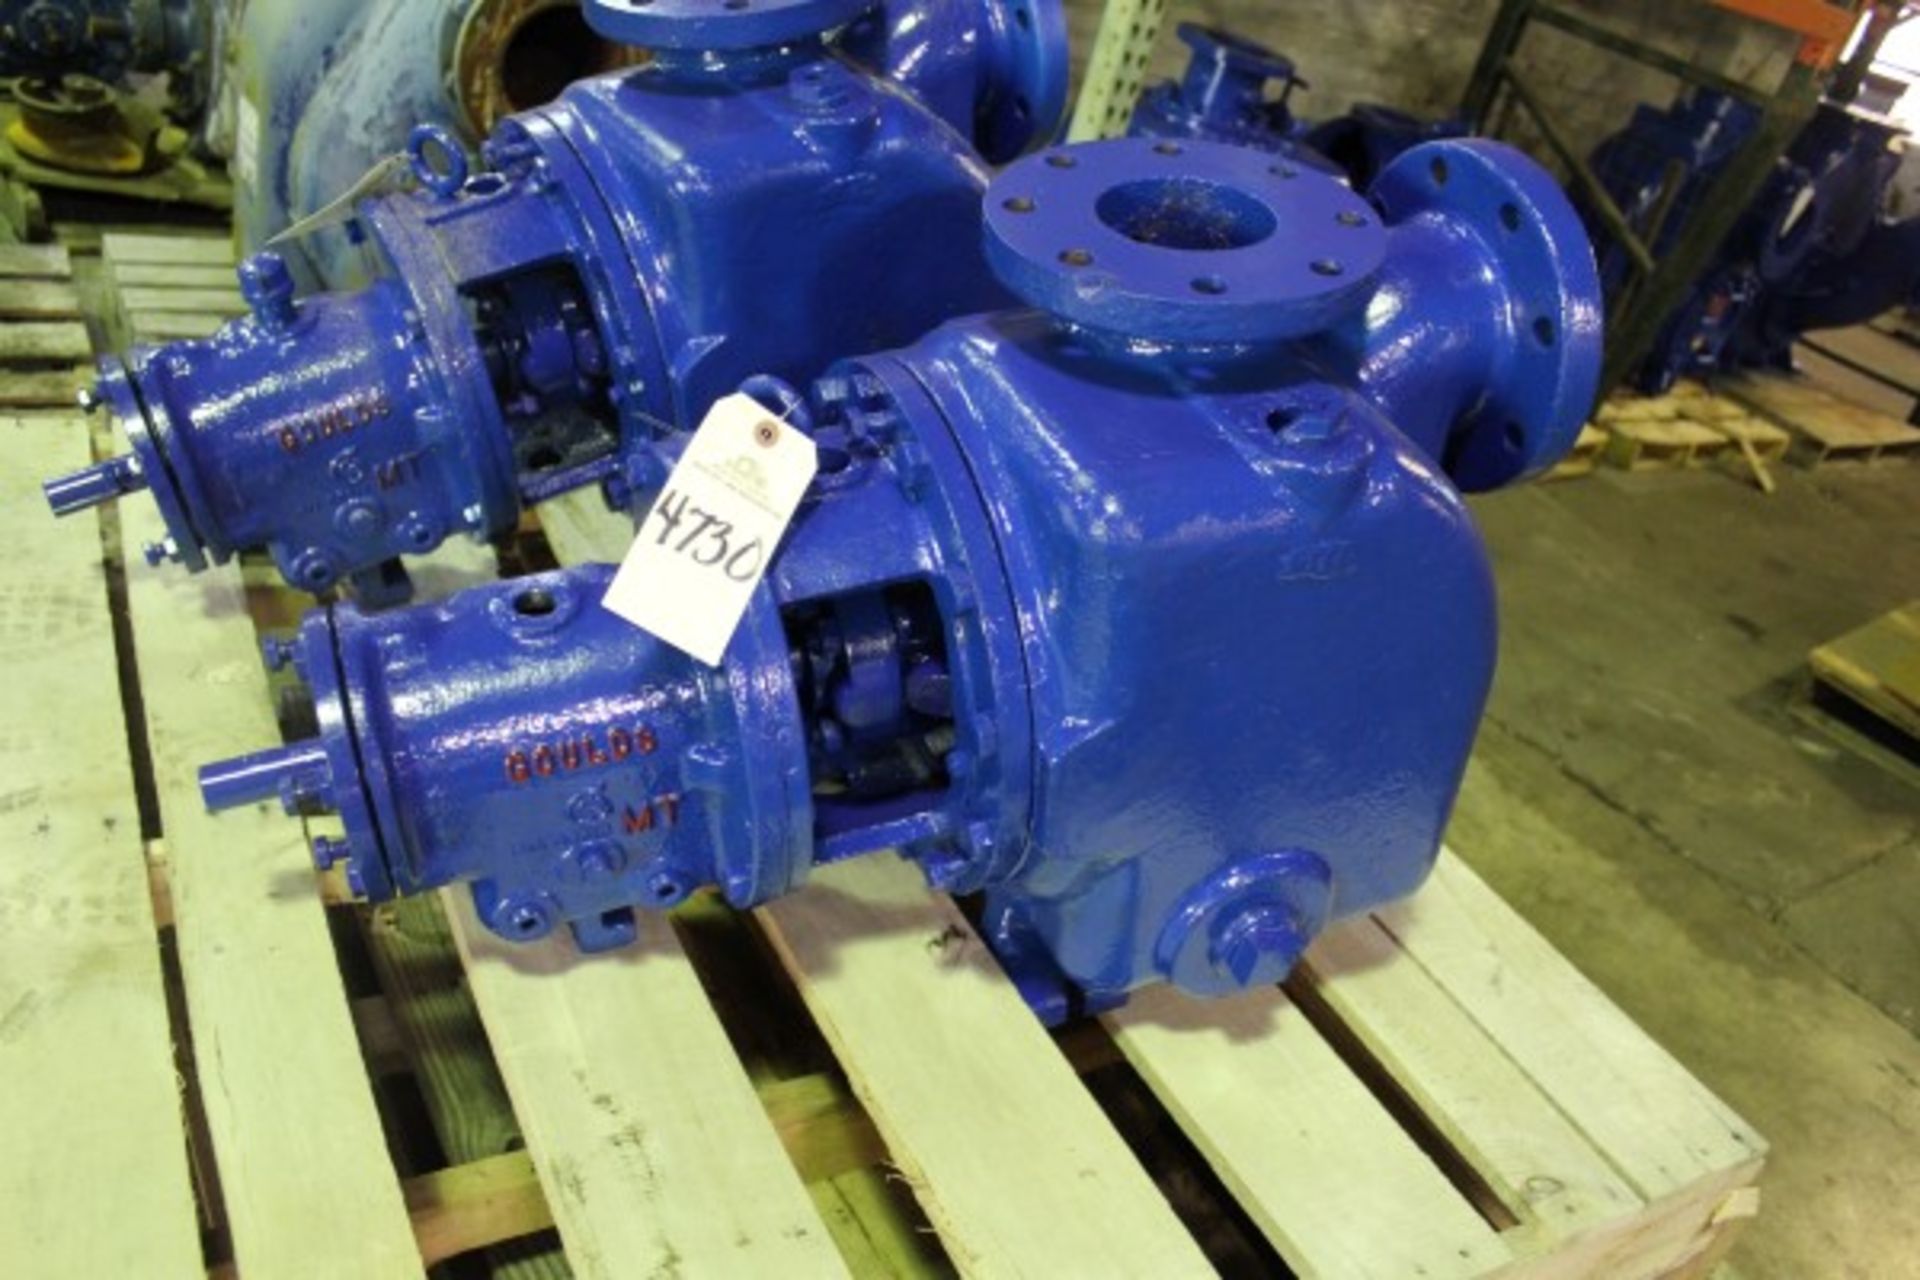 Goulds 4 x 4 -10 Pump | Seller to load for $10 per lot or buyers may remove hand carry items by